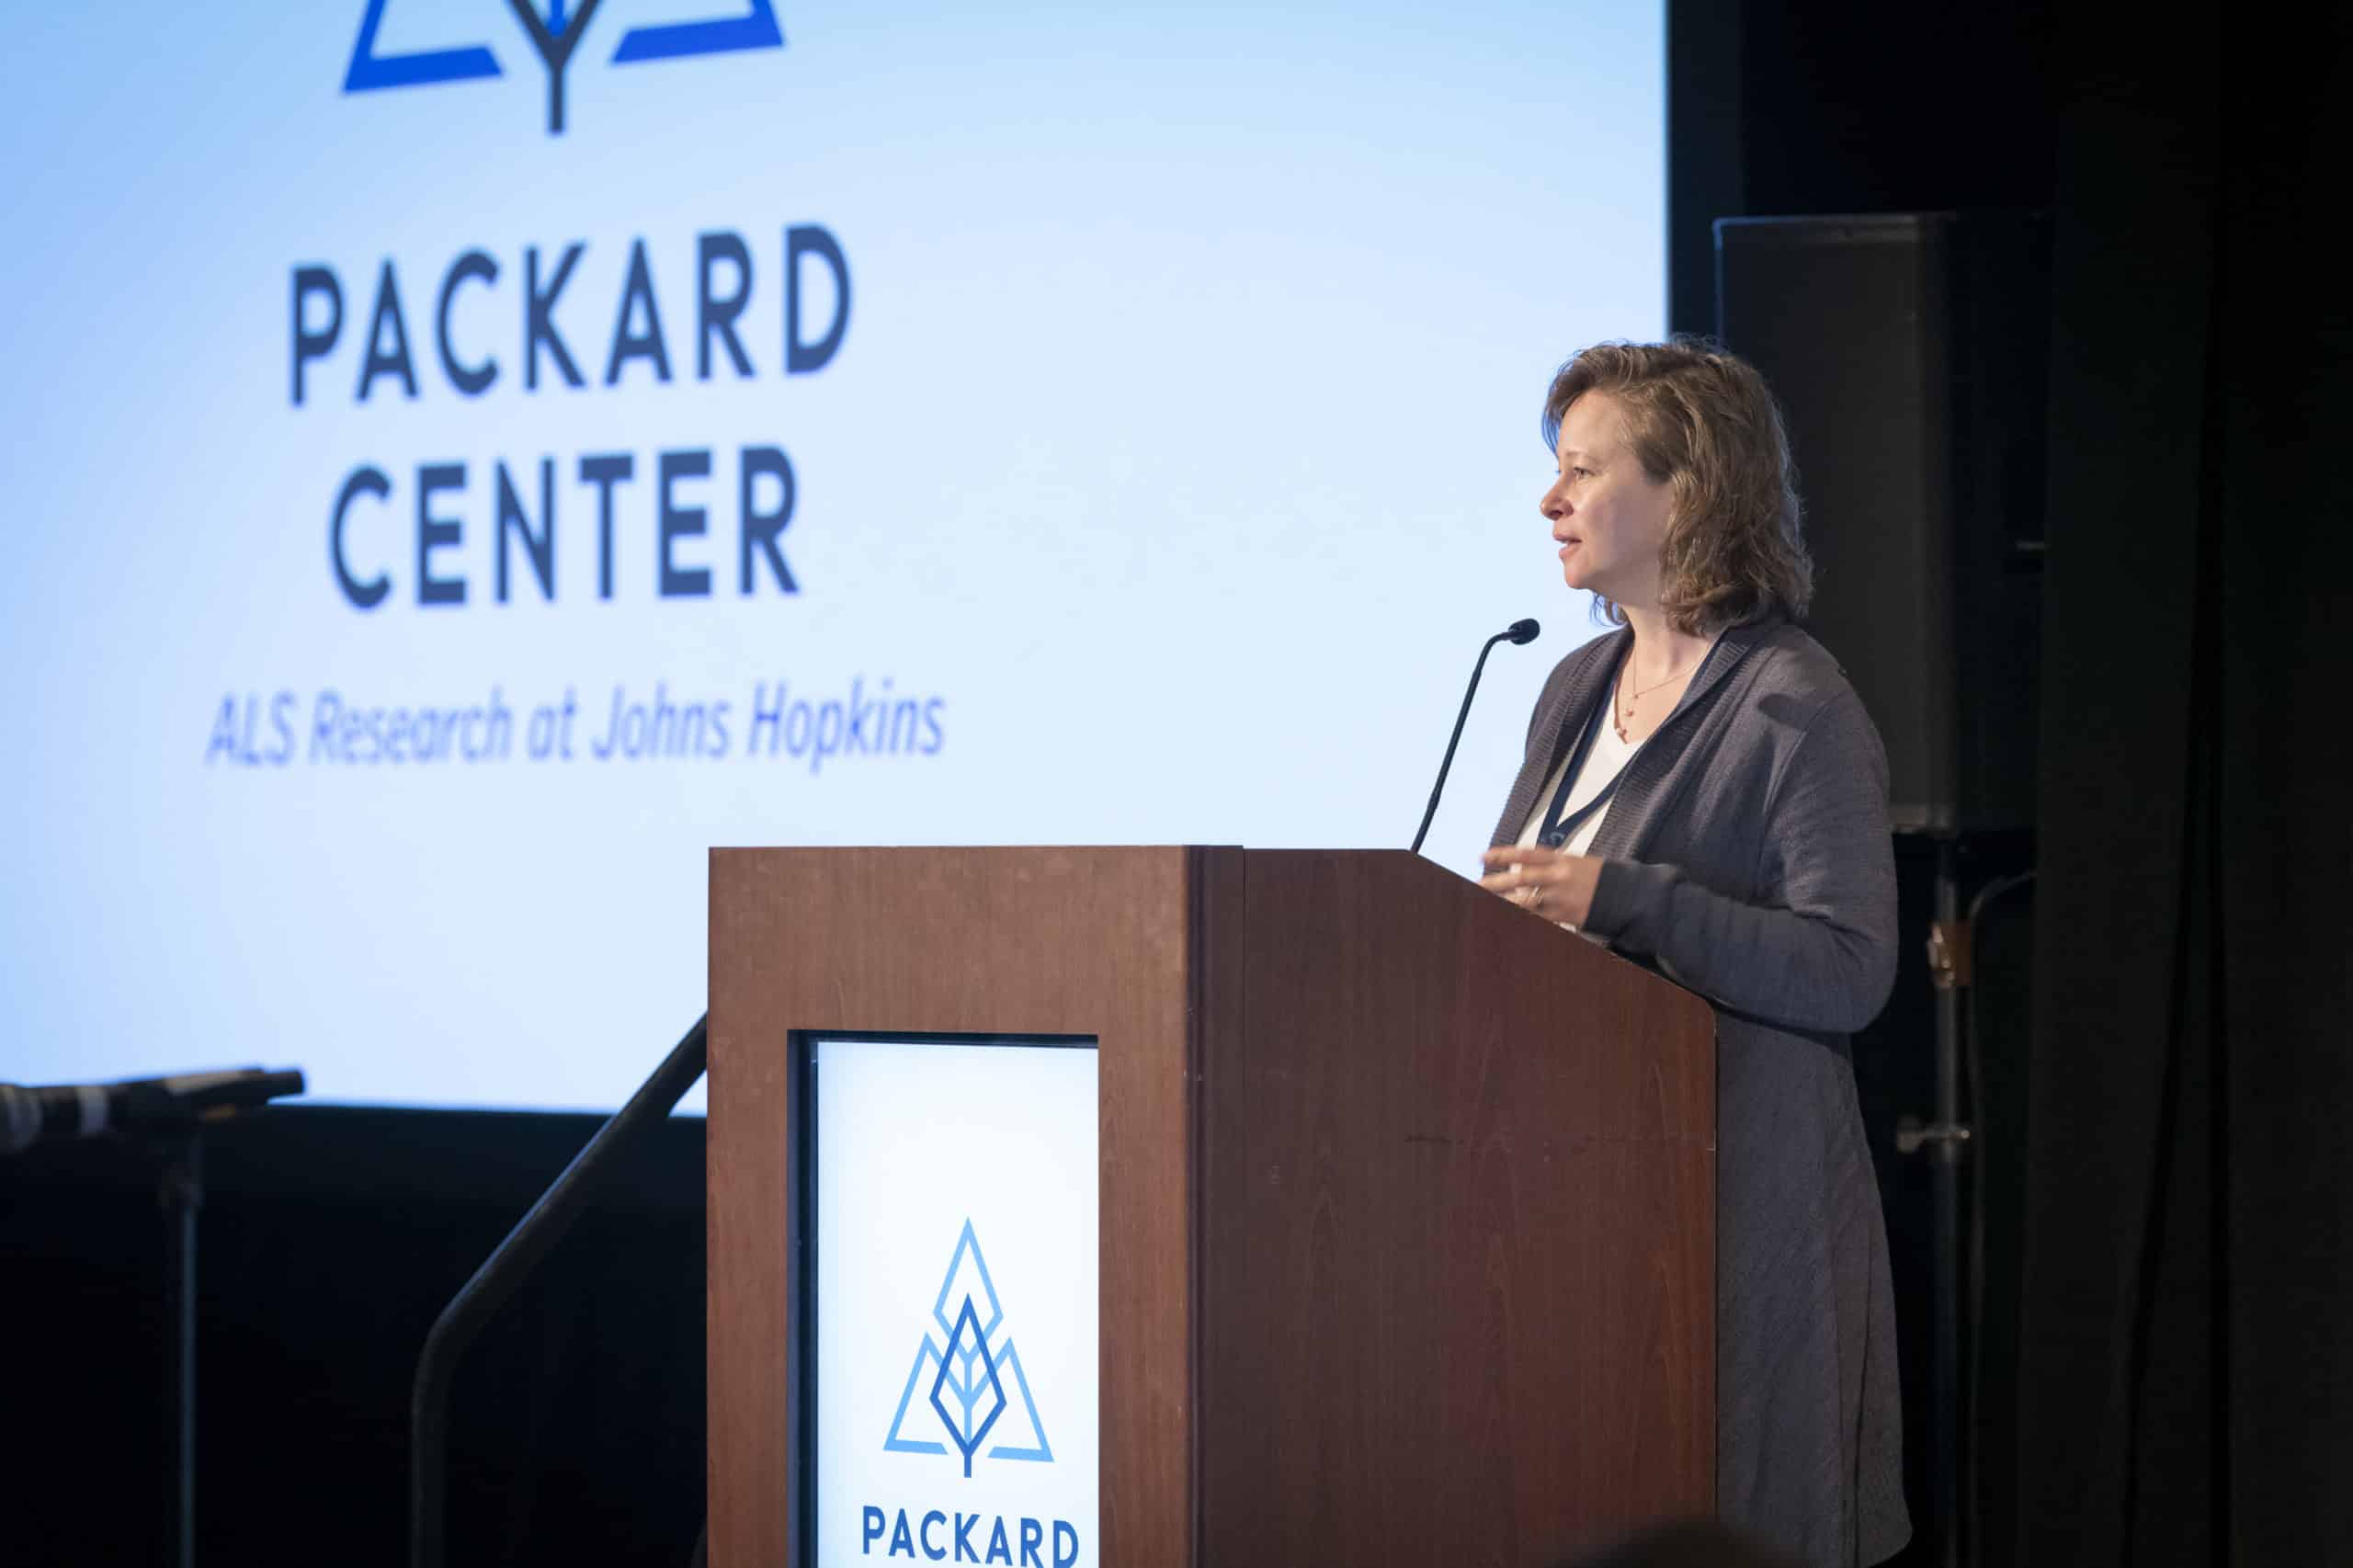 Packard Center’s 23rd Annual Symposium brings together established luminaries in ALS research and rising stars from around the world.